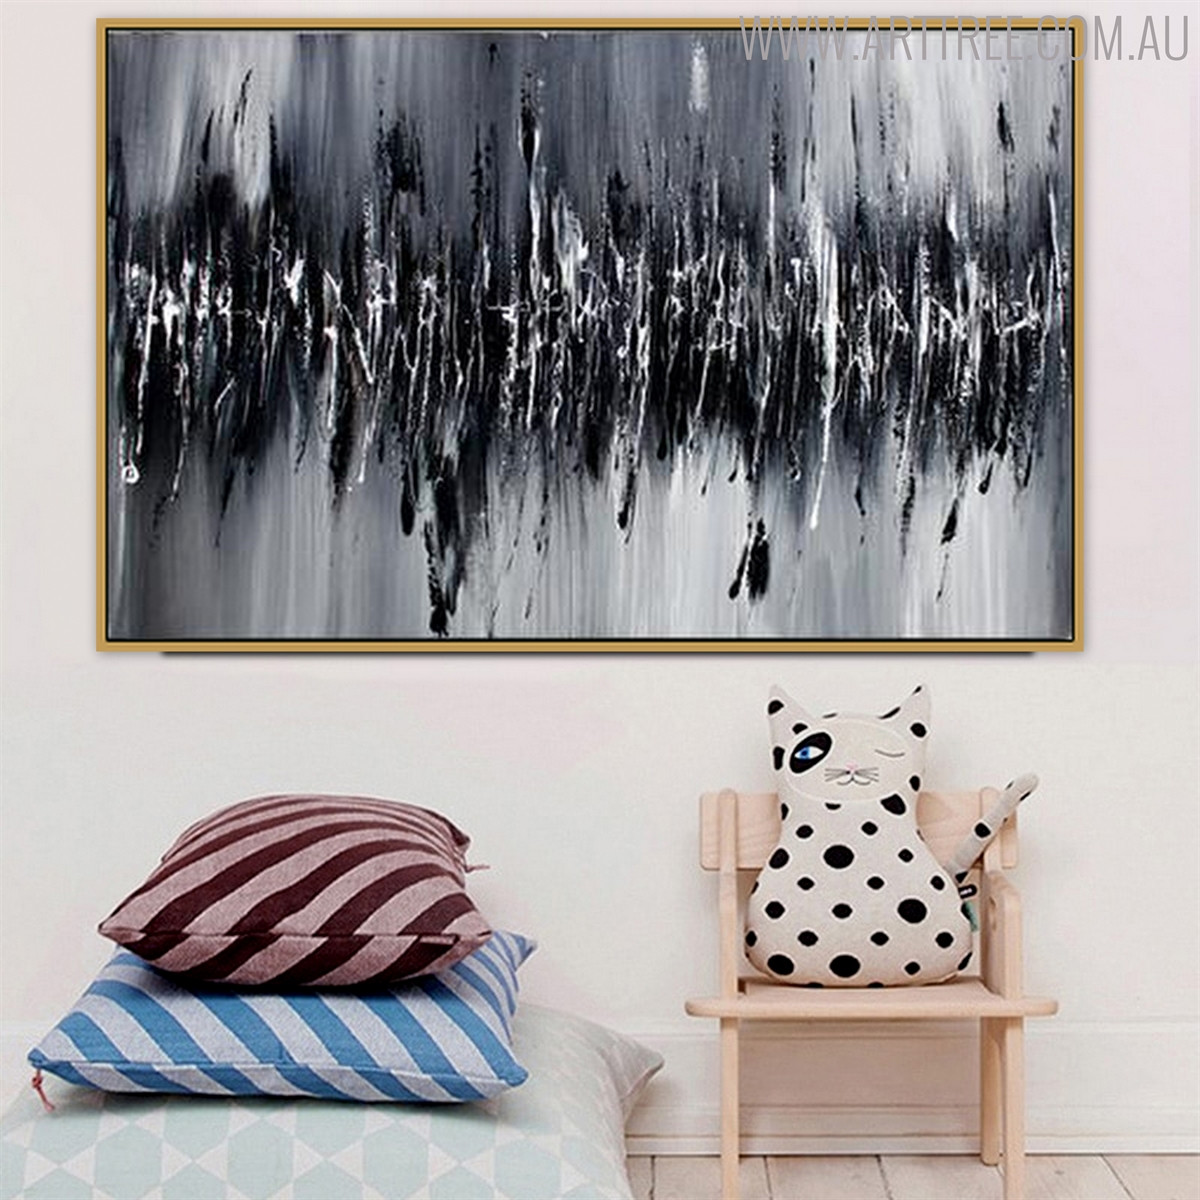 Scratches Effect Abstract Modern Heavy Texture Oil Smudge on Canvas for Living Room Wall Decor